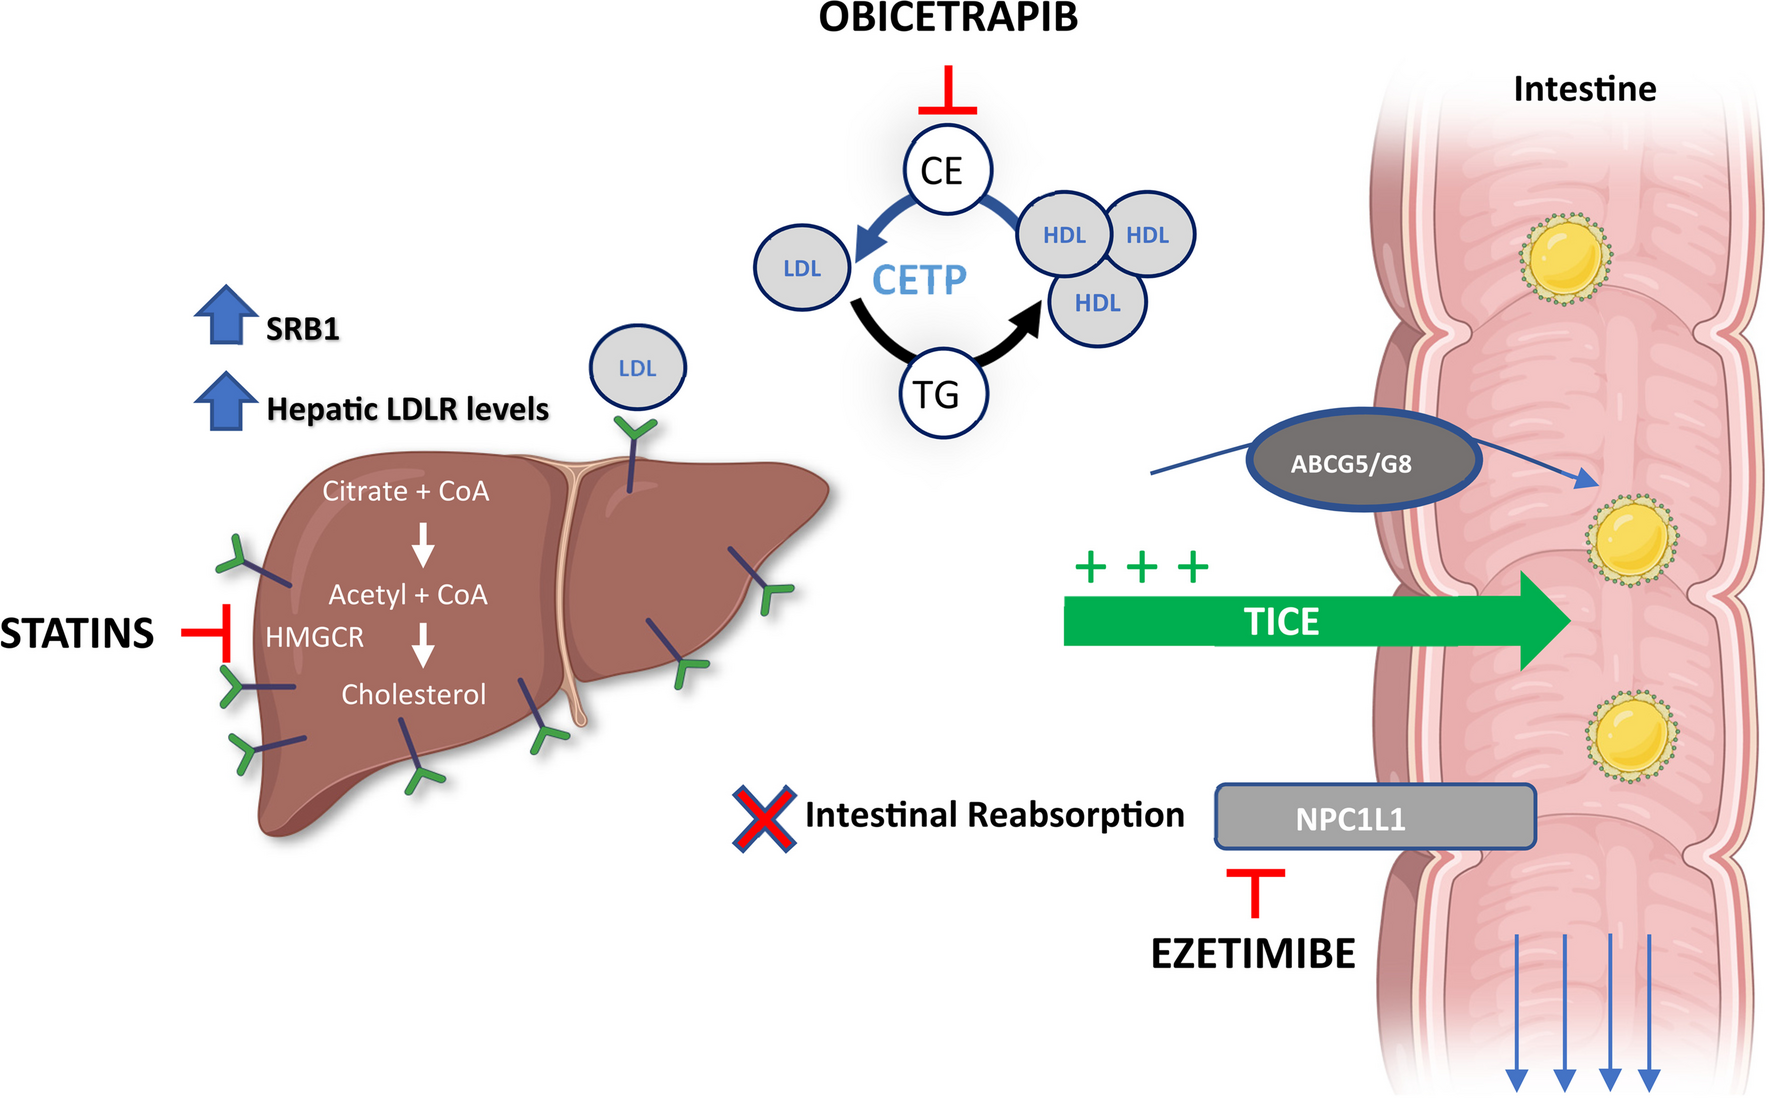 Obicetrapib: Reversing the Tide of CETP Inhibitor Disappointments